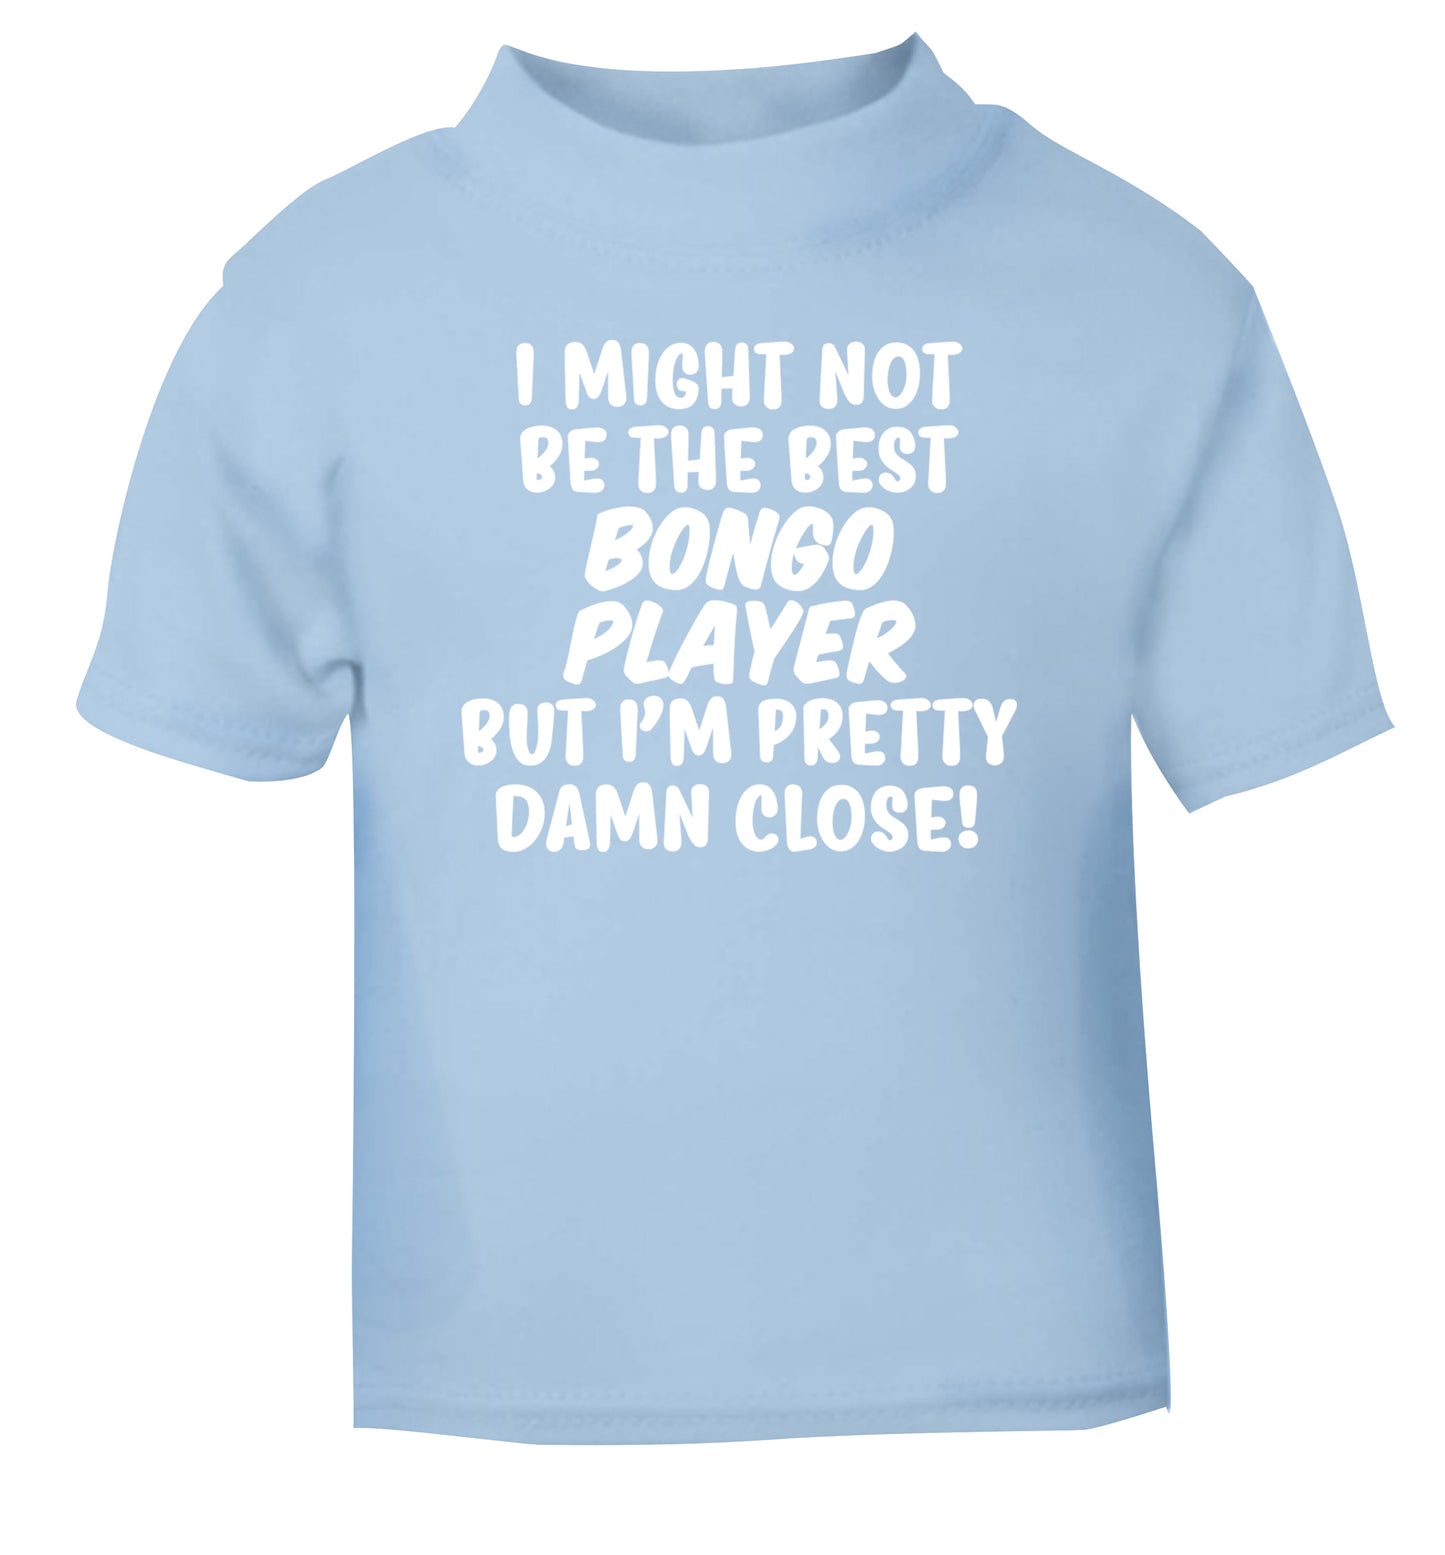 I might not be the best bongo player but I'm pretty close! light blue Baby Toddler Tshirt 2 Years